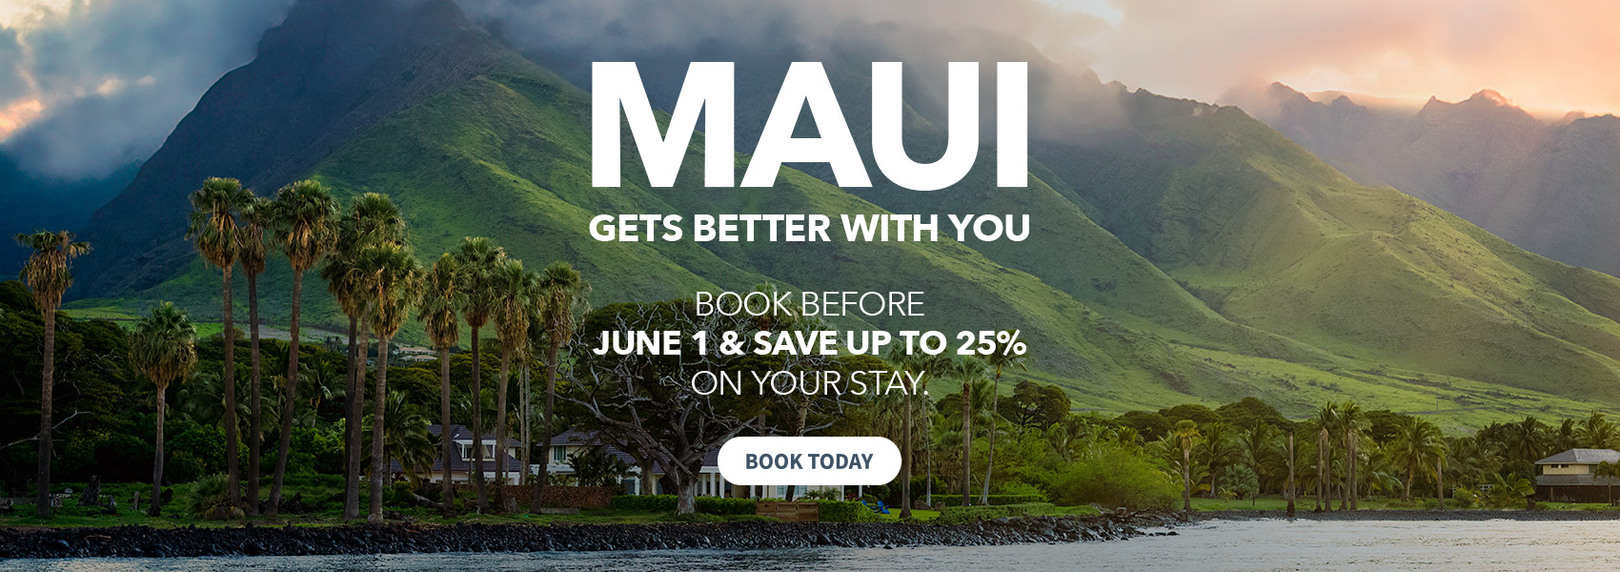 Maui Gets Better With You. Book before June 1st and save up to 25% on your stay.